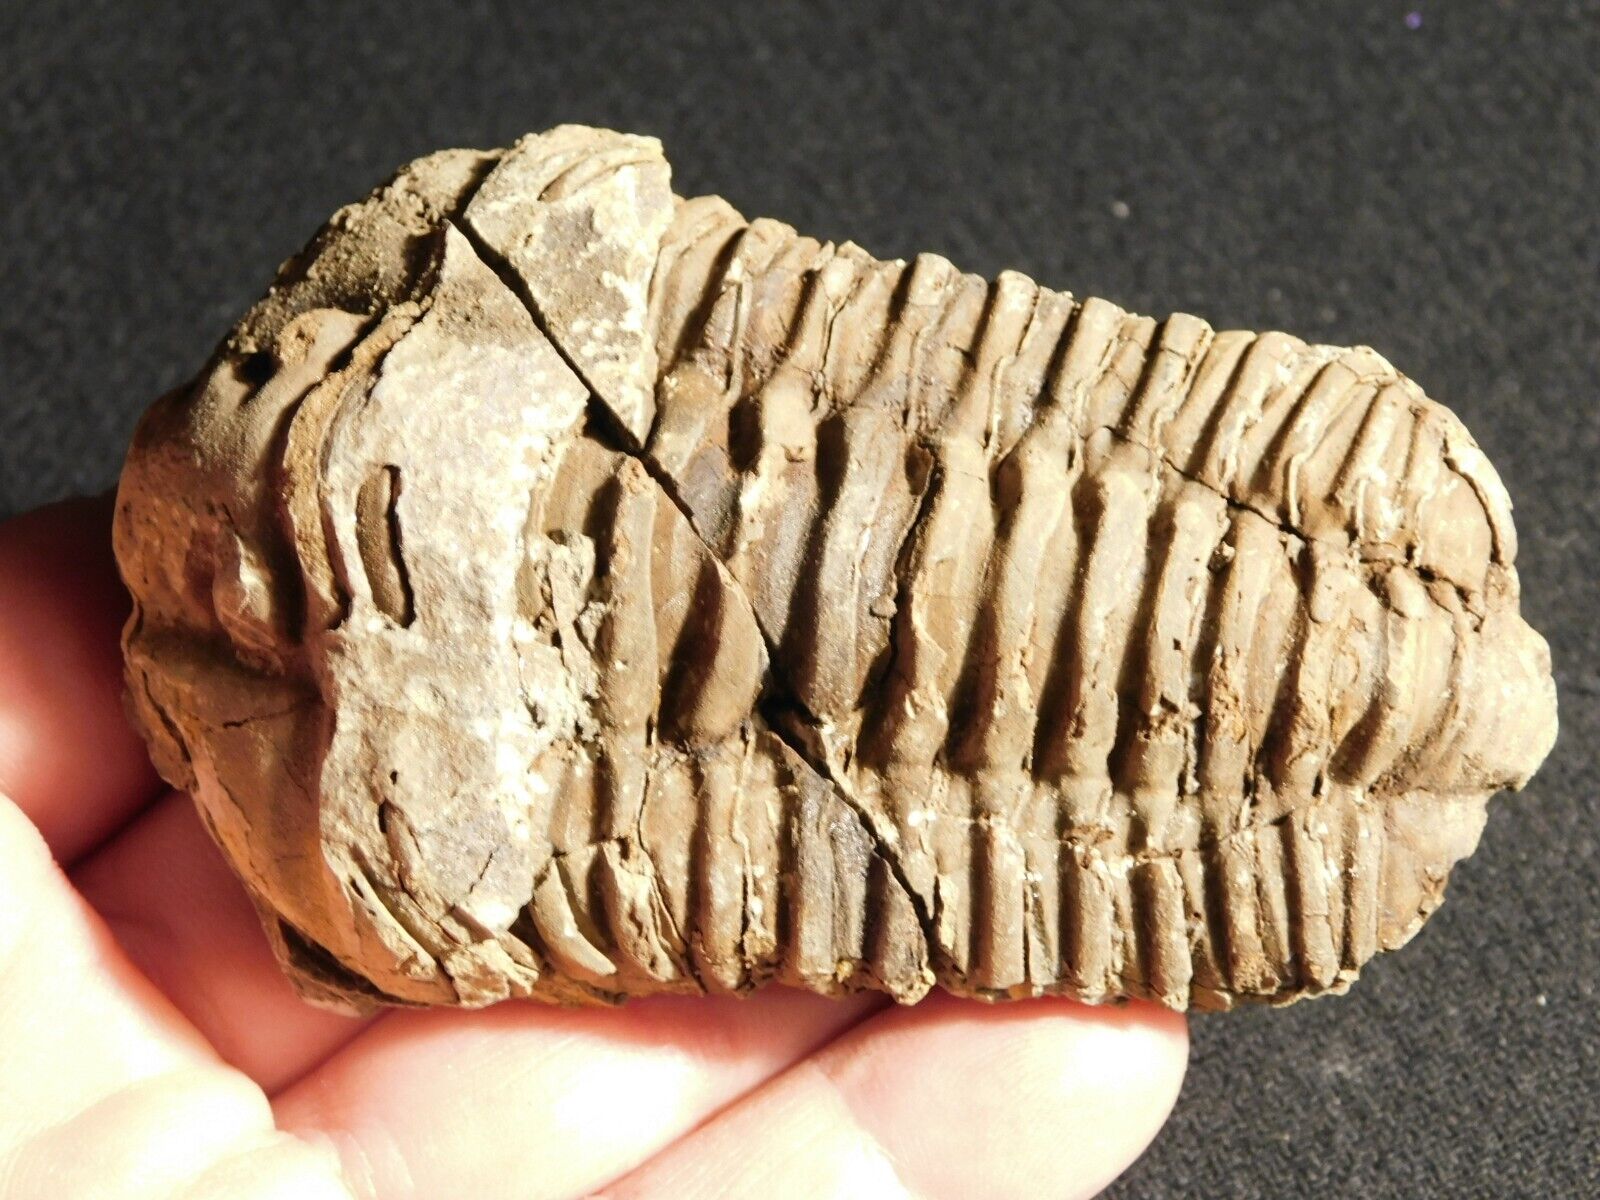 BIG 460 MILLION Year Old TRILOBITE Fossil From Morocco 148gr